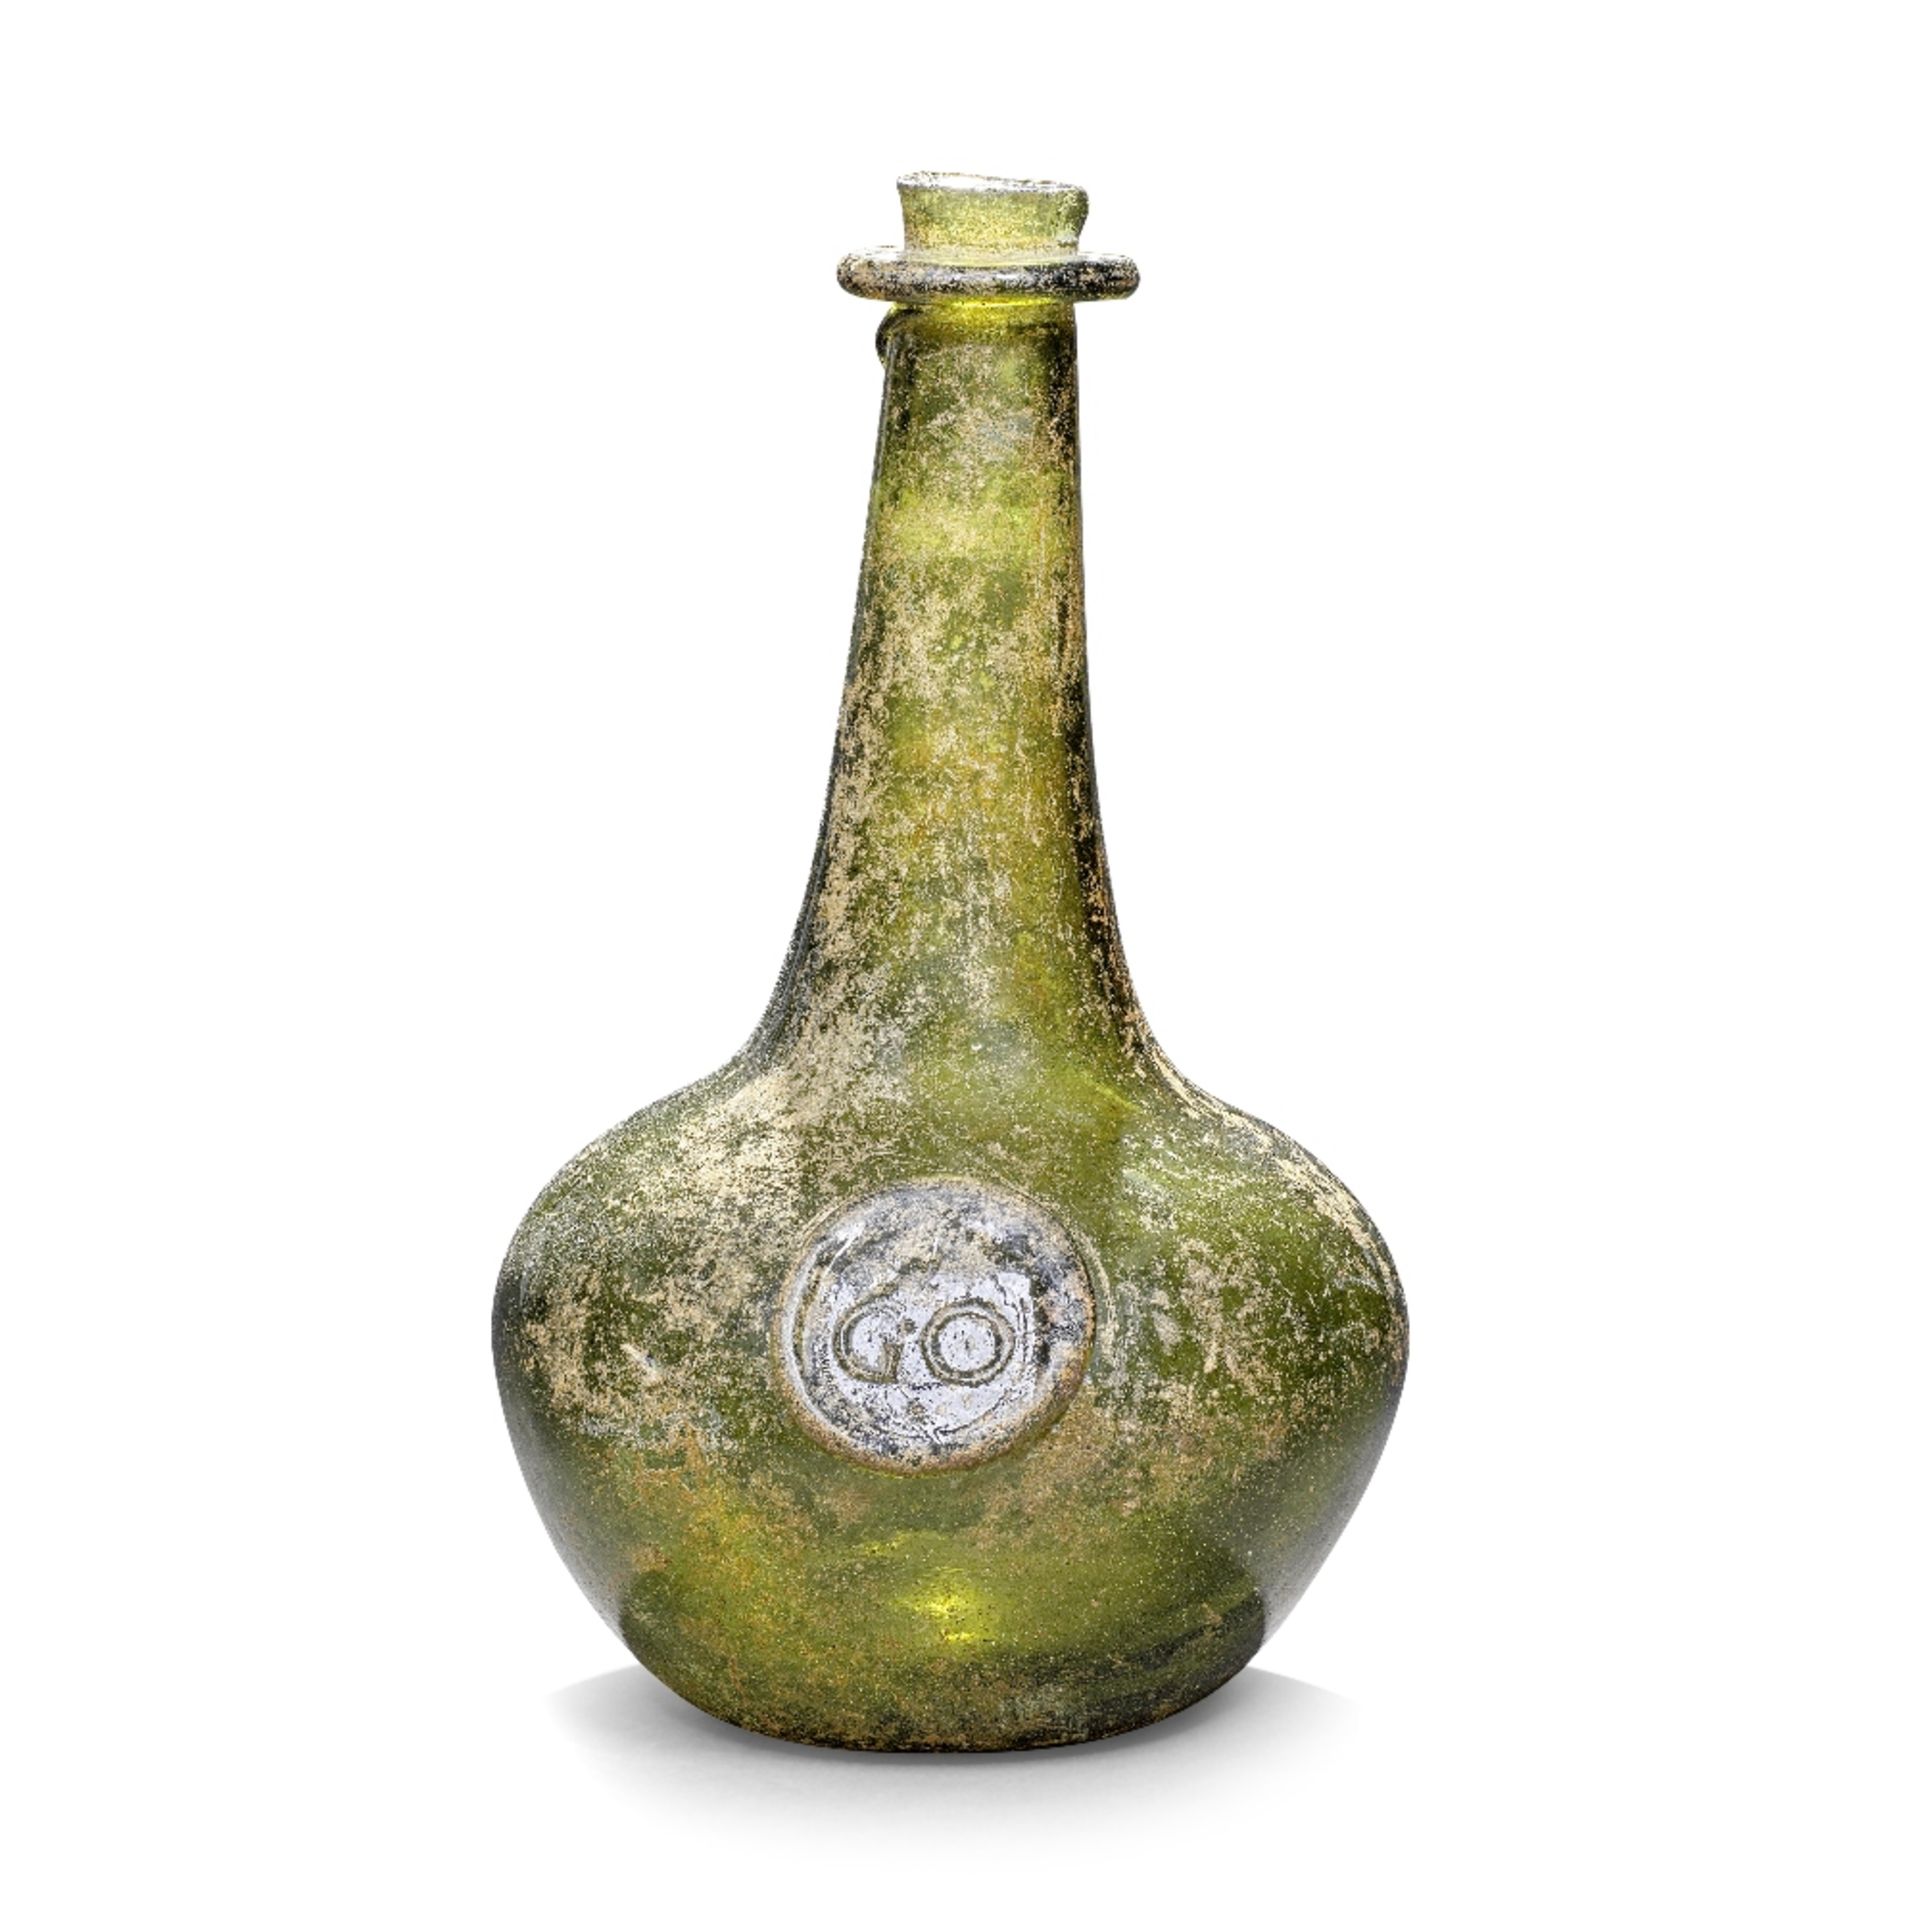 An exceptionally rare and important sealed 'Shaft and Globe' wine bottle, circa 1660-65